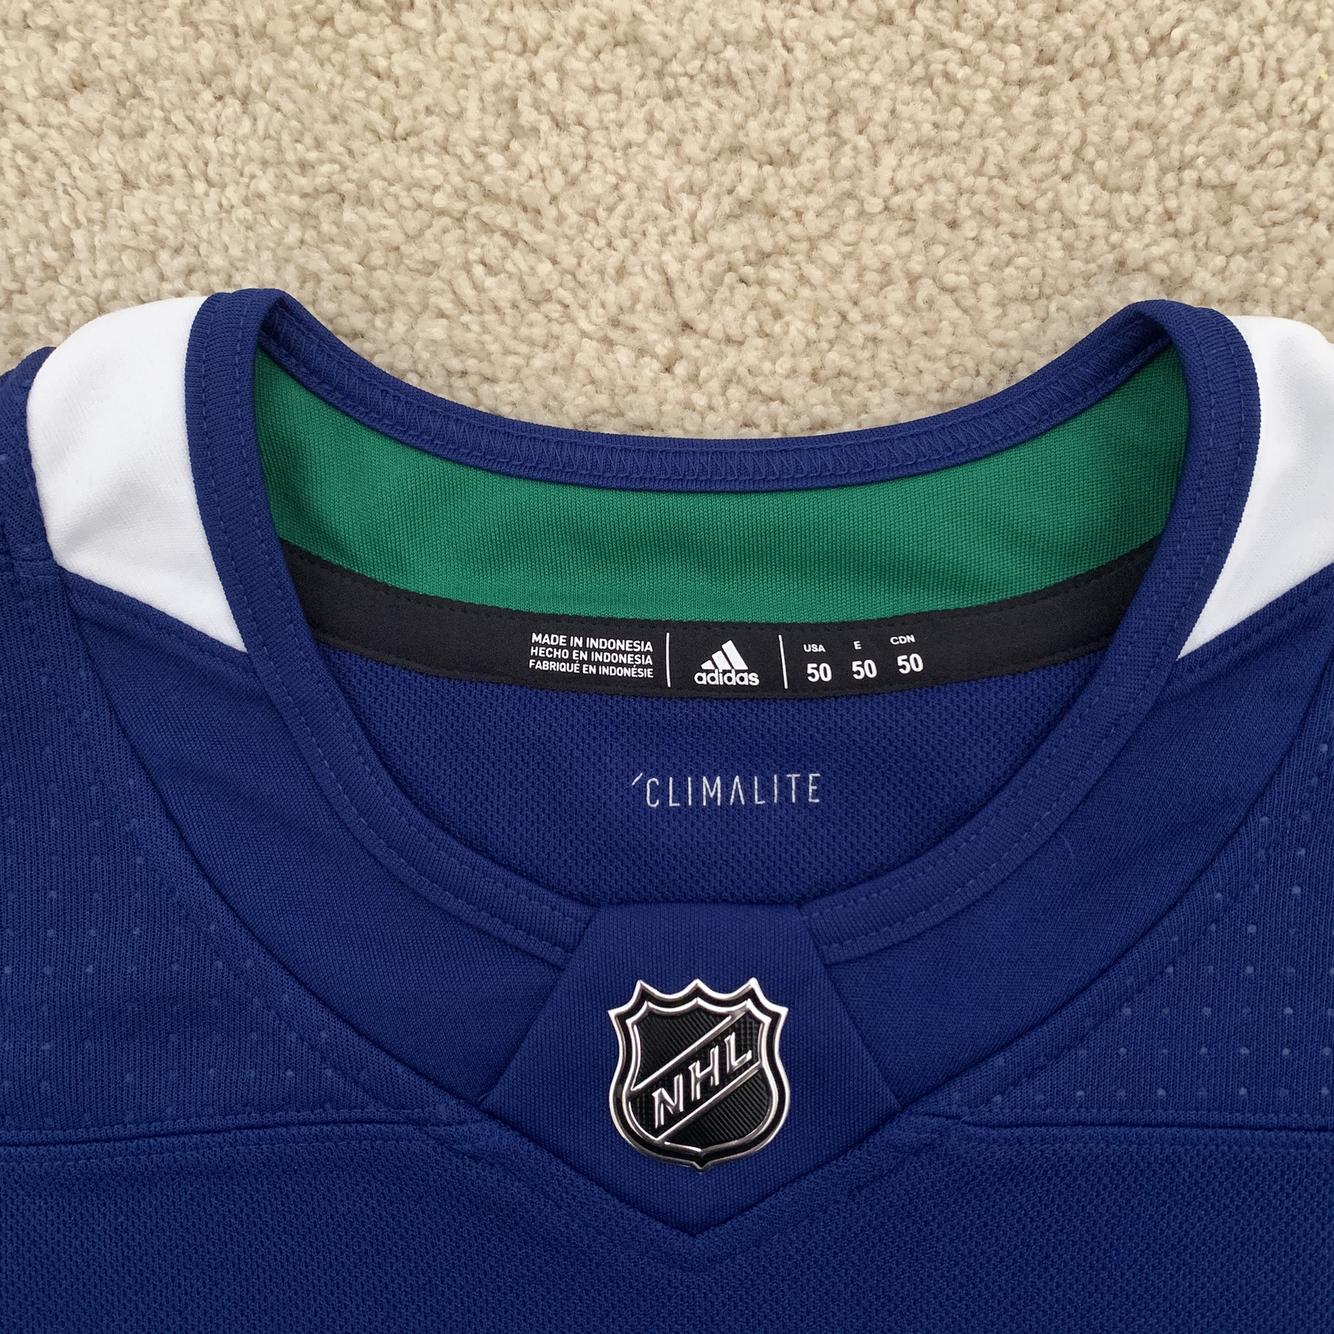 Authentic Brock Boeser Vancouver Canucks Adidas Home Hockey Jersey Men's  Size 50